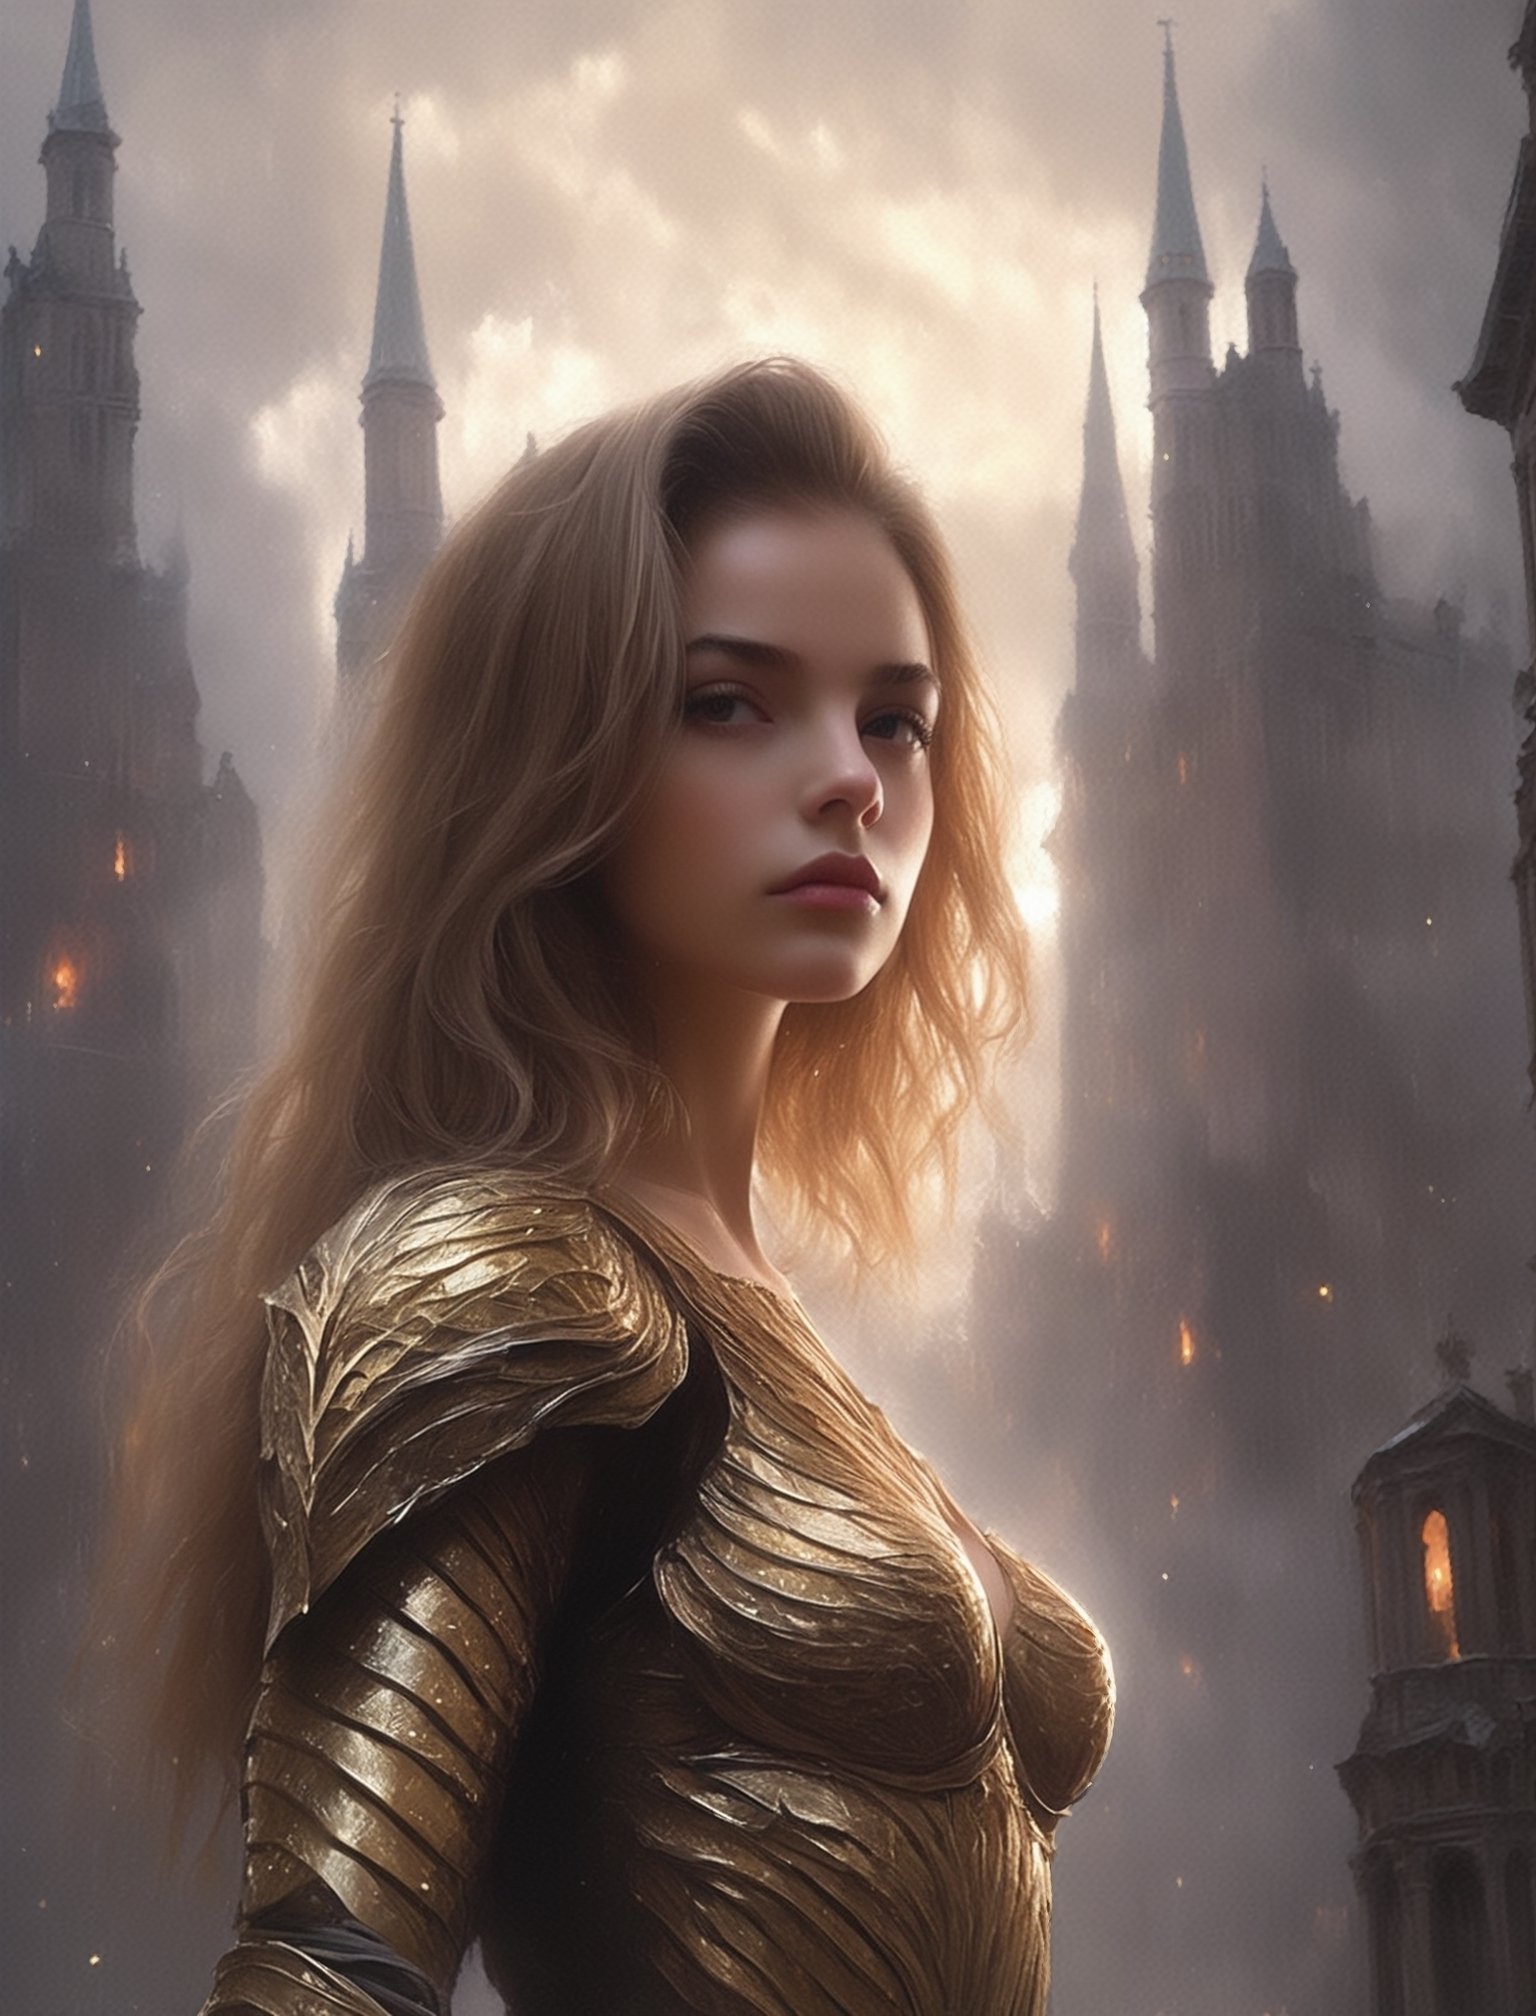 "Dark romance fantasy, close up of a woman with sword wearing dragon bone armor standing above a city, an army looking up at her, embers", bones, ribcage style armor, eldritch, dracolich-like armor, wavy golden dark blonde hair, Masterpiece, Intricate, Insanely Detailed, Art by lois van baarle, todd lockwood, chris rallis, anna dittmann, Kim Jung Gi, Gregory Crewdson, Yoji Shinkawa, Guy Denning, Textured!!!!, Chiaroscuro!!, actionpainting, best quality, smooth finish, masterpiece,DracolichXL24,art_booster,LegendDarkFantasy,ellafreya,renny the insta girl,real_booster